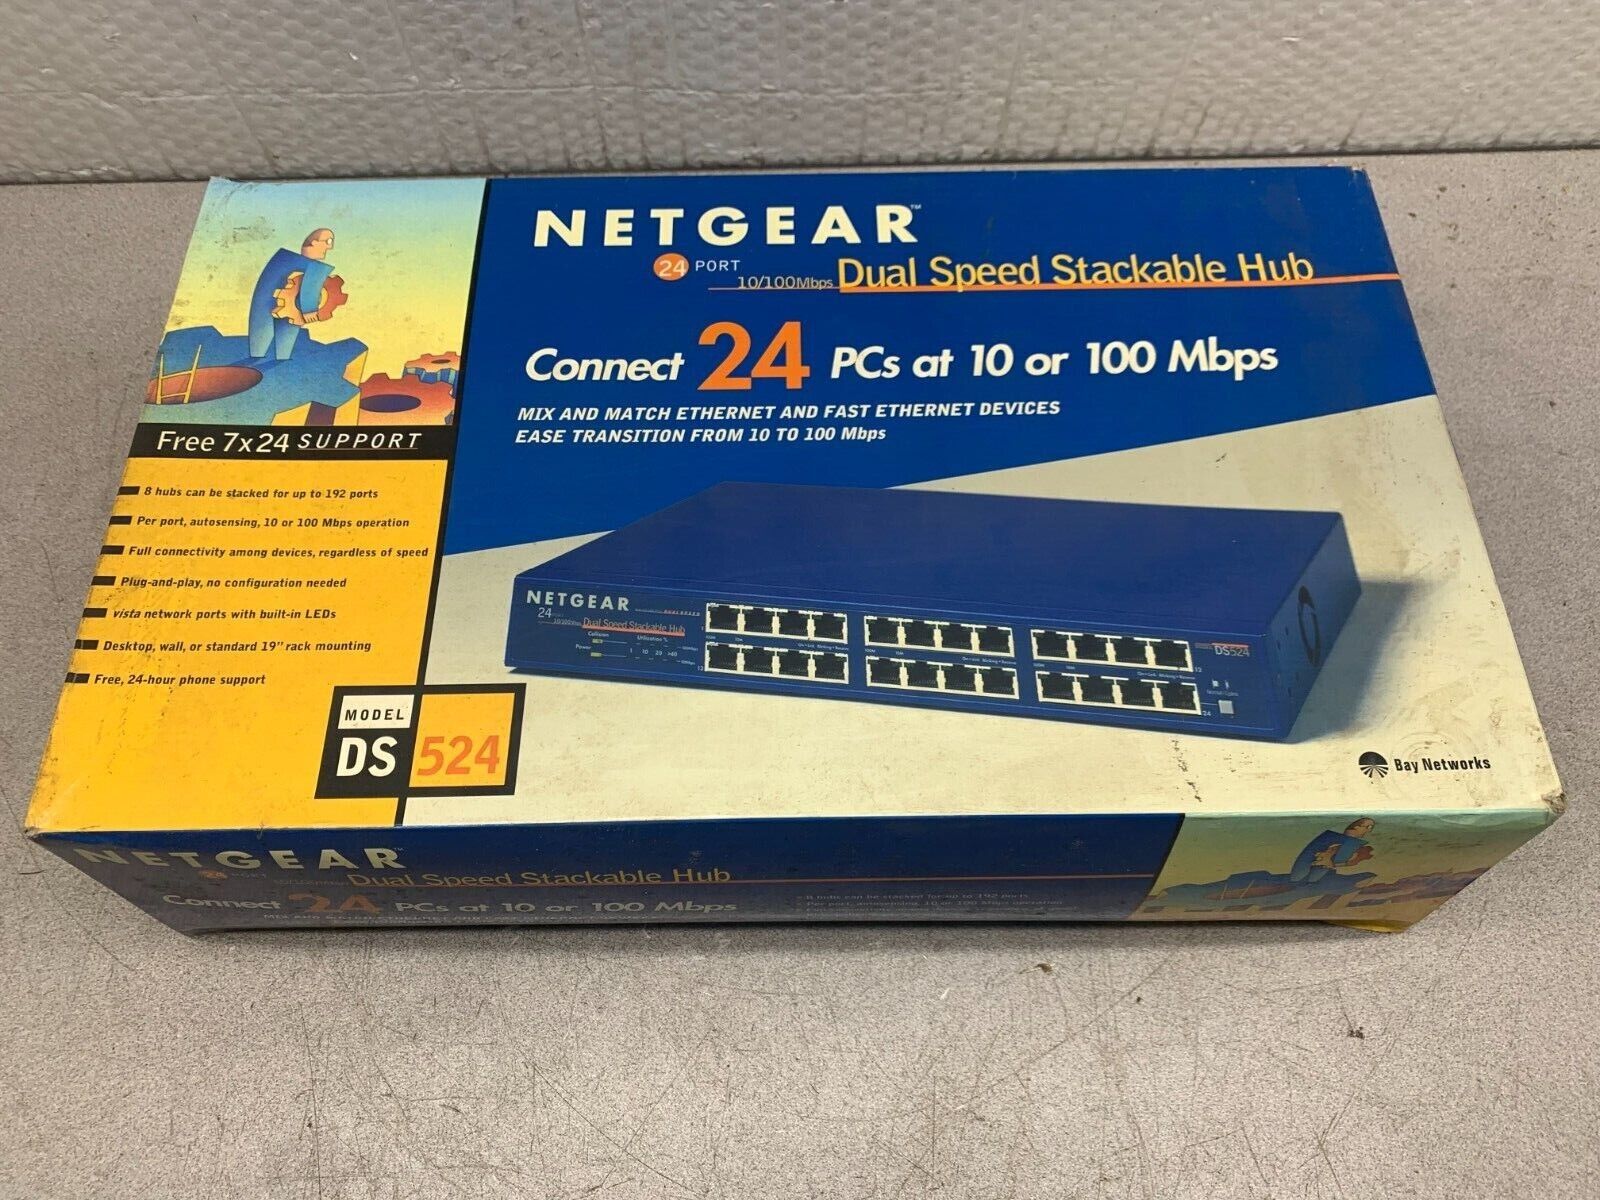 NEW IN BOX NETGEAR DUAL SPEED STACKABLE HUB DS524